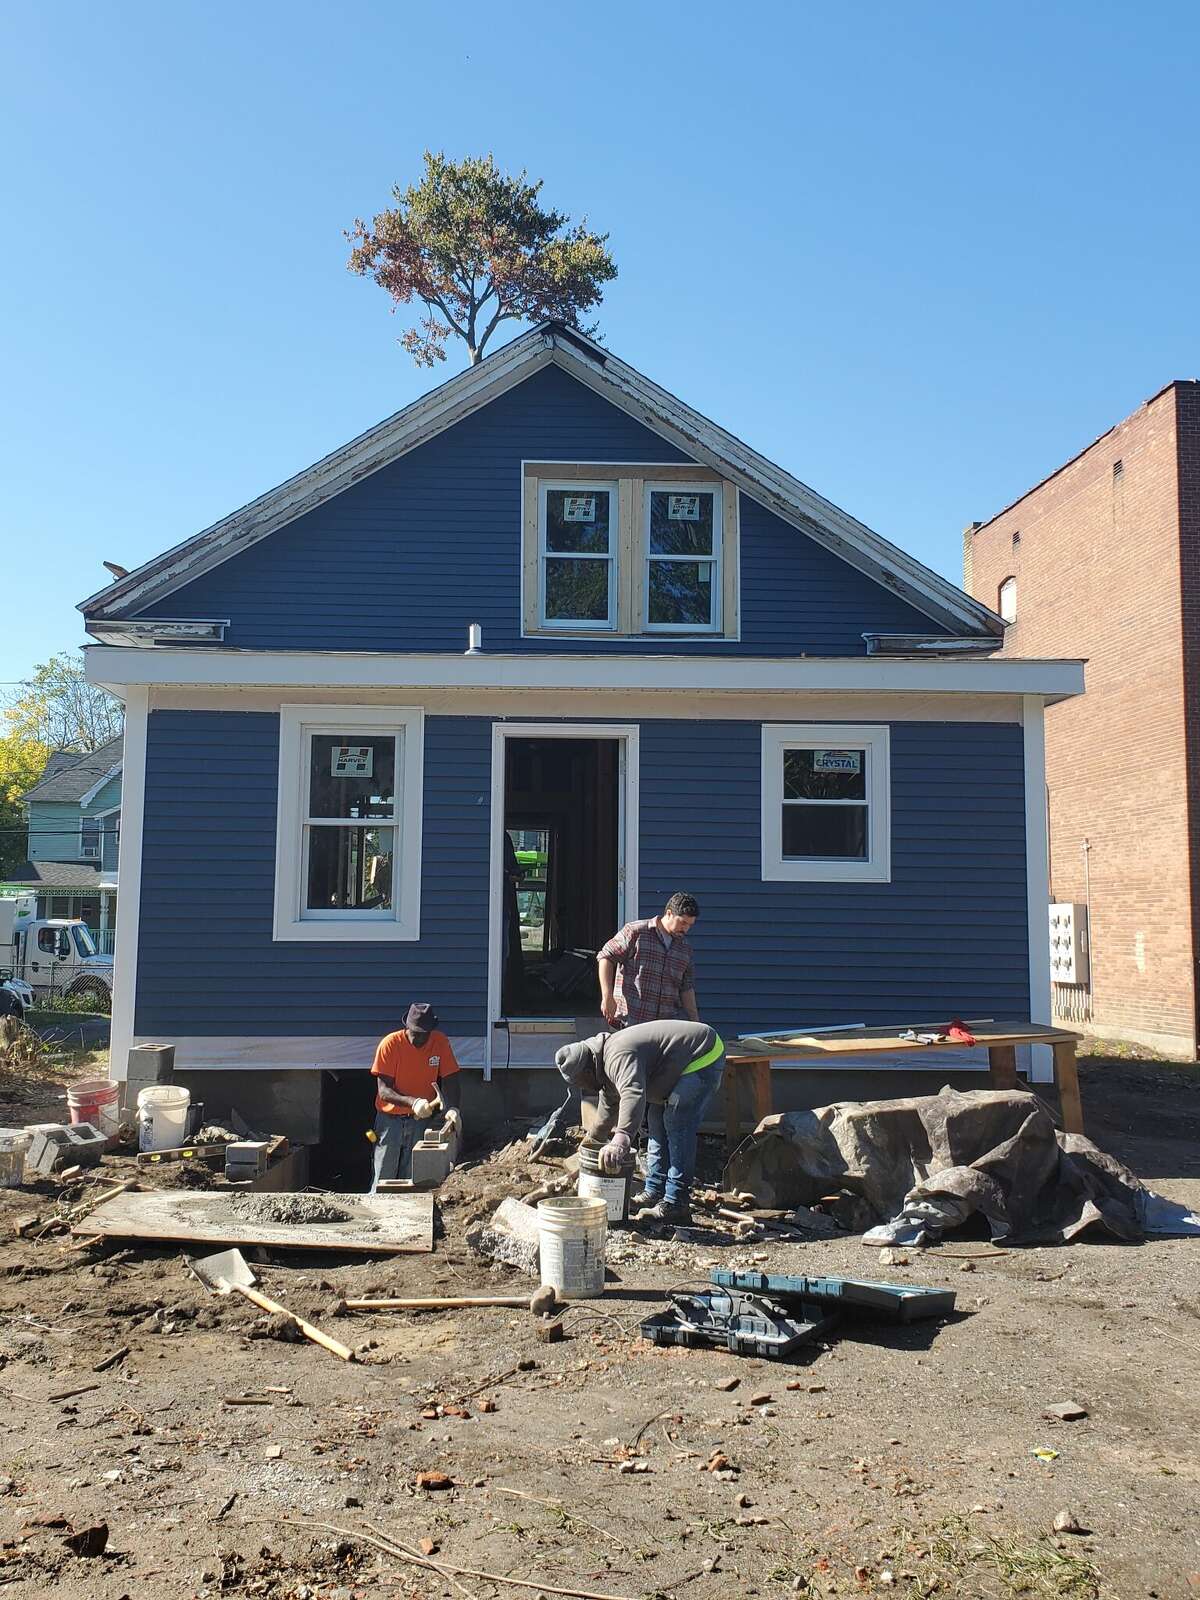 The first homeownership property through the Hartford Land Bank is located 78 Martin St. in Hartford. It is shown here as redevelopment nears completion.